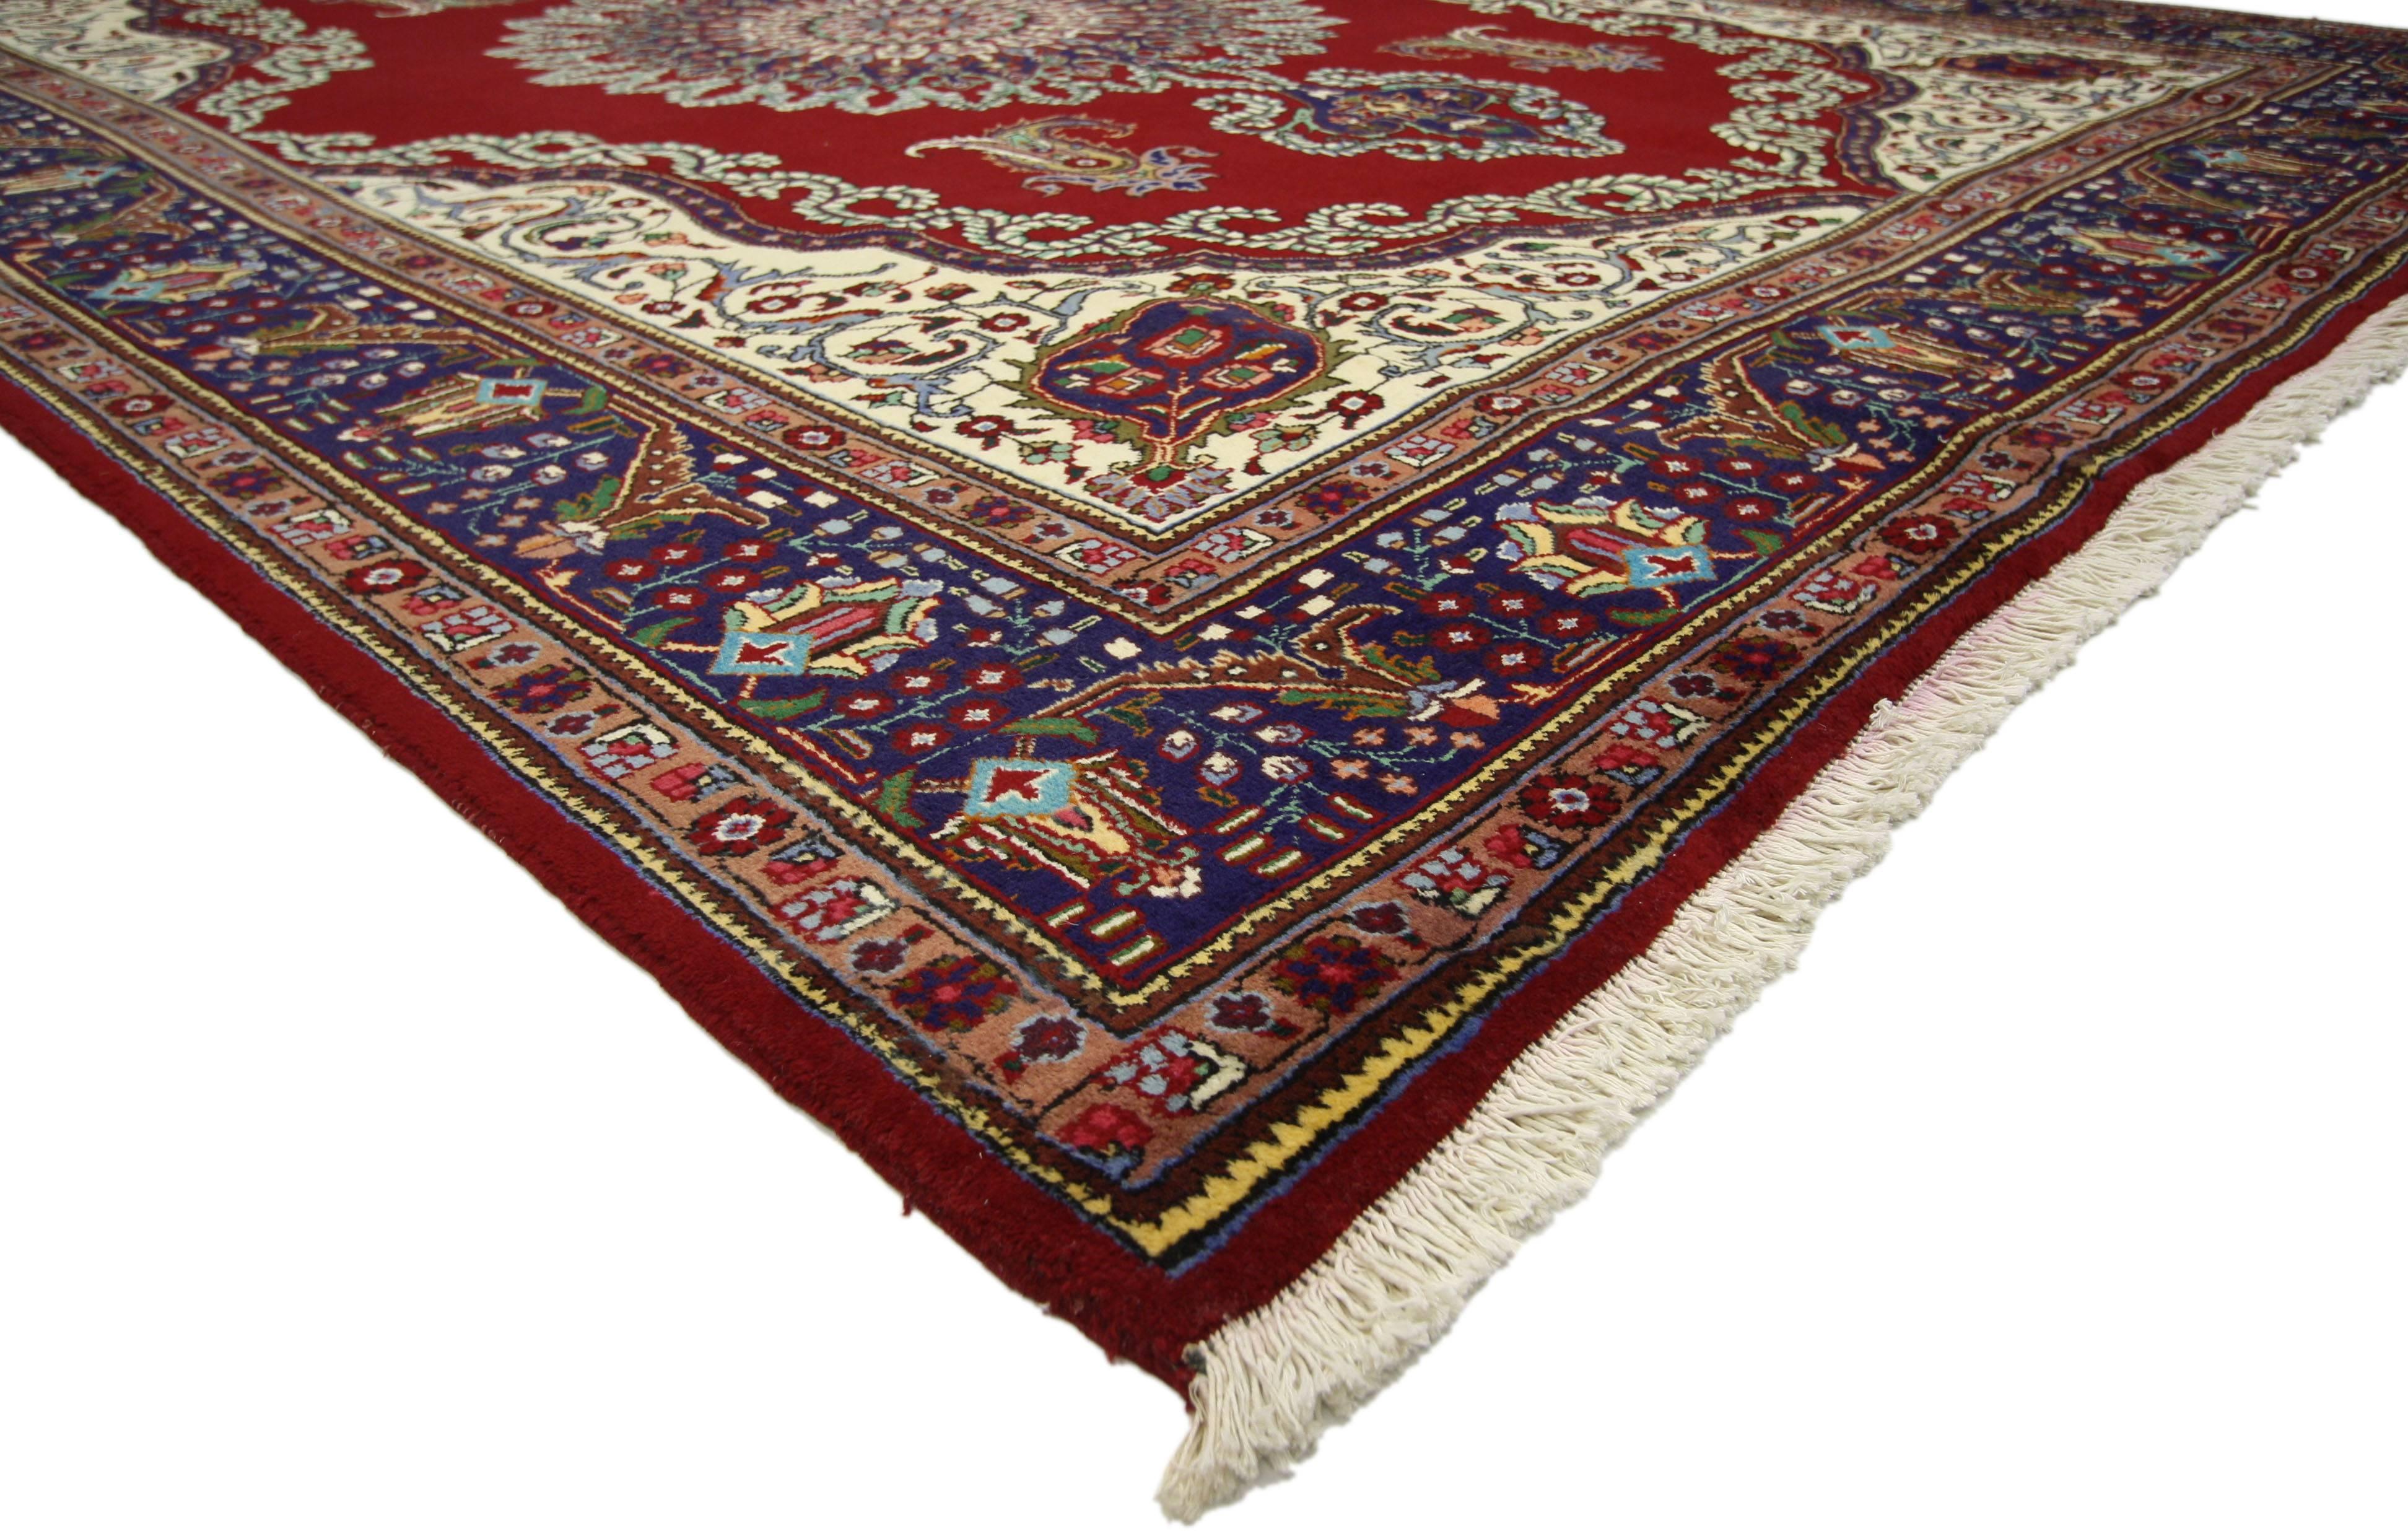 76485 Vintage Persian Tabriz Rug with Regal Jacobean Style 09'08 X 13'01. This hand-knotted wool vintage Persian Tabriz rug appears like a sumptuous Italian velvet, recalling the rich and luxurious design furnishings of a bygone era such as the